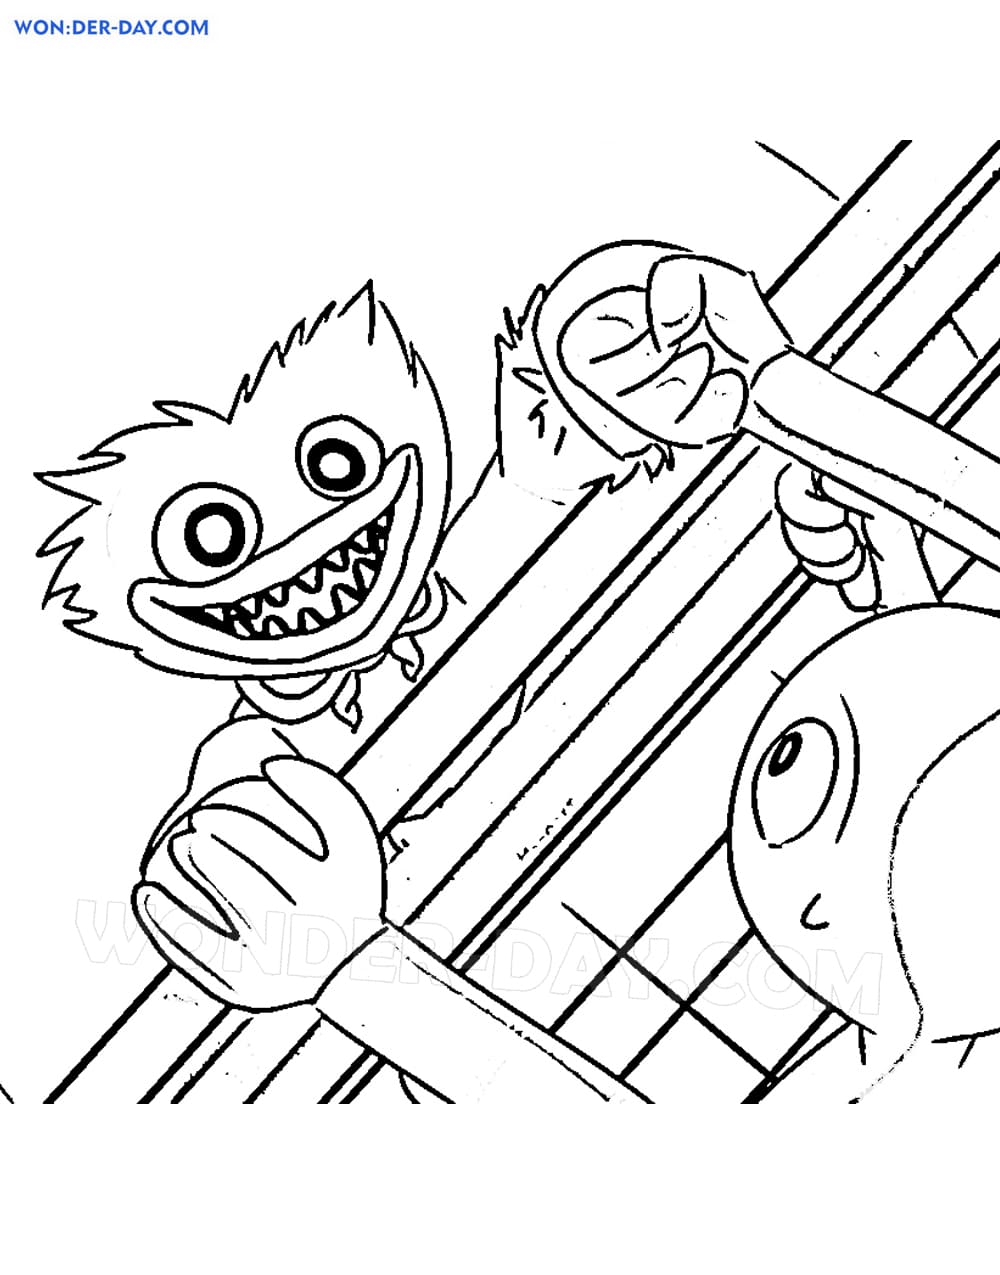 Poppy Playtime Coloring Pages   Free Coloring Pages   Coloring Home